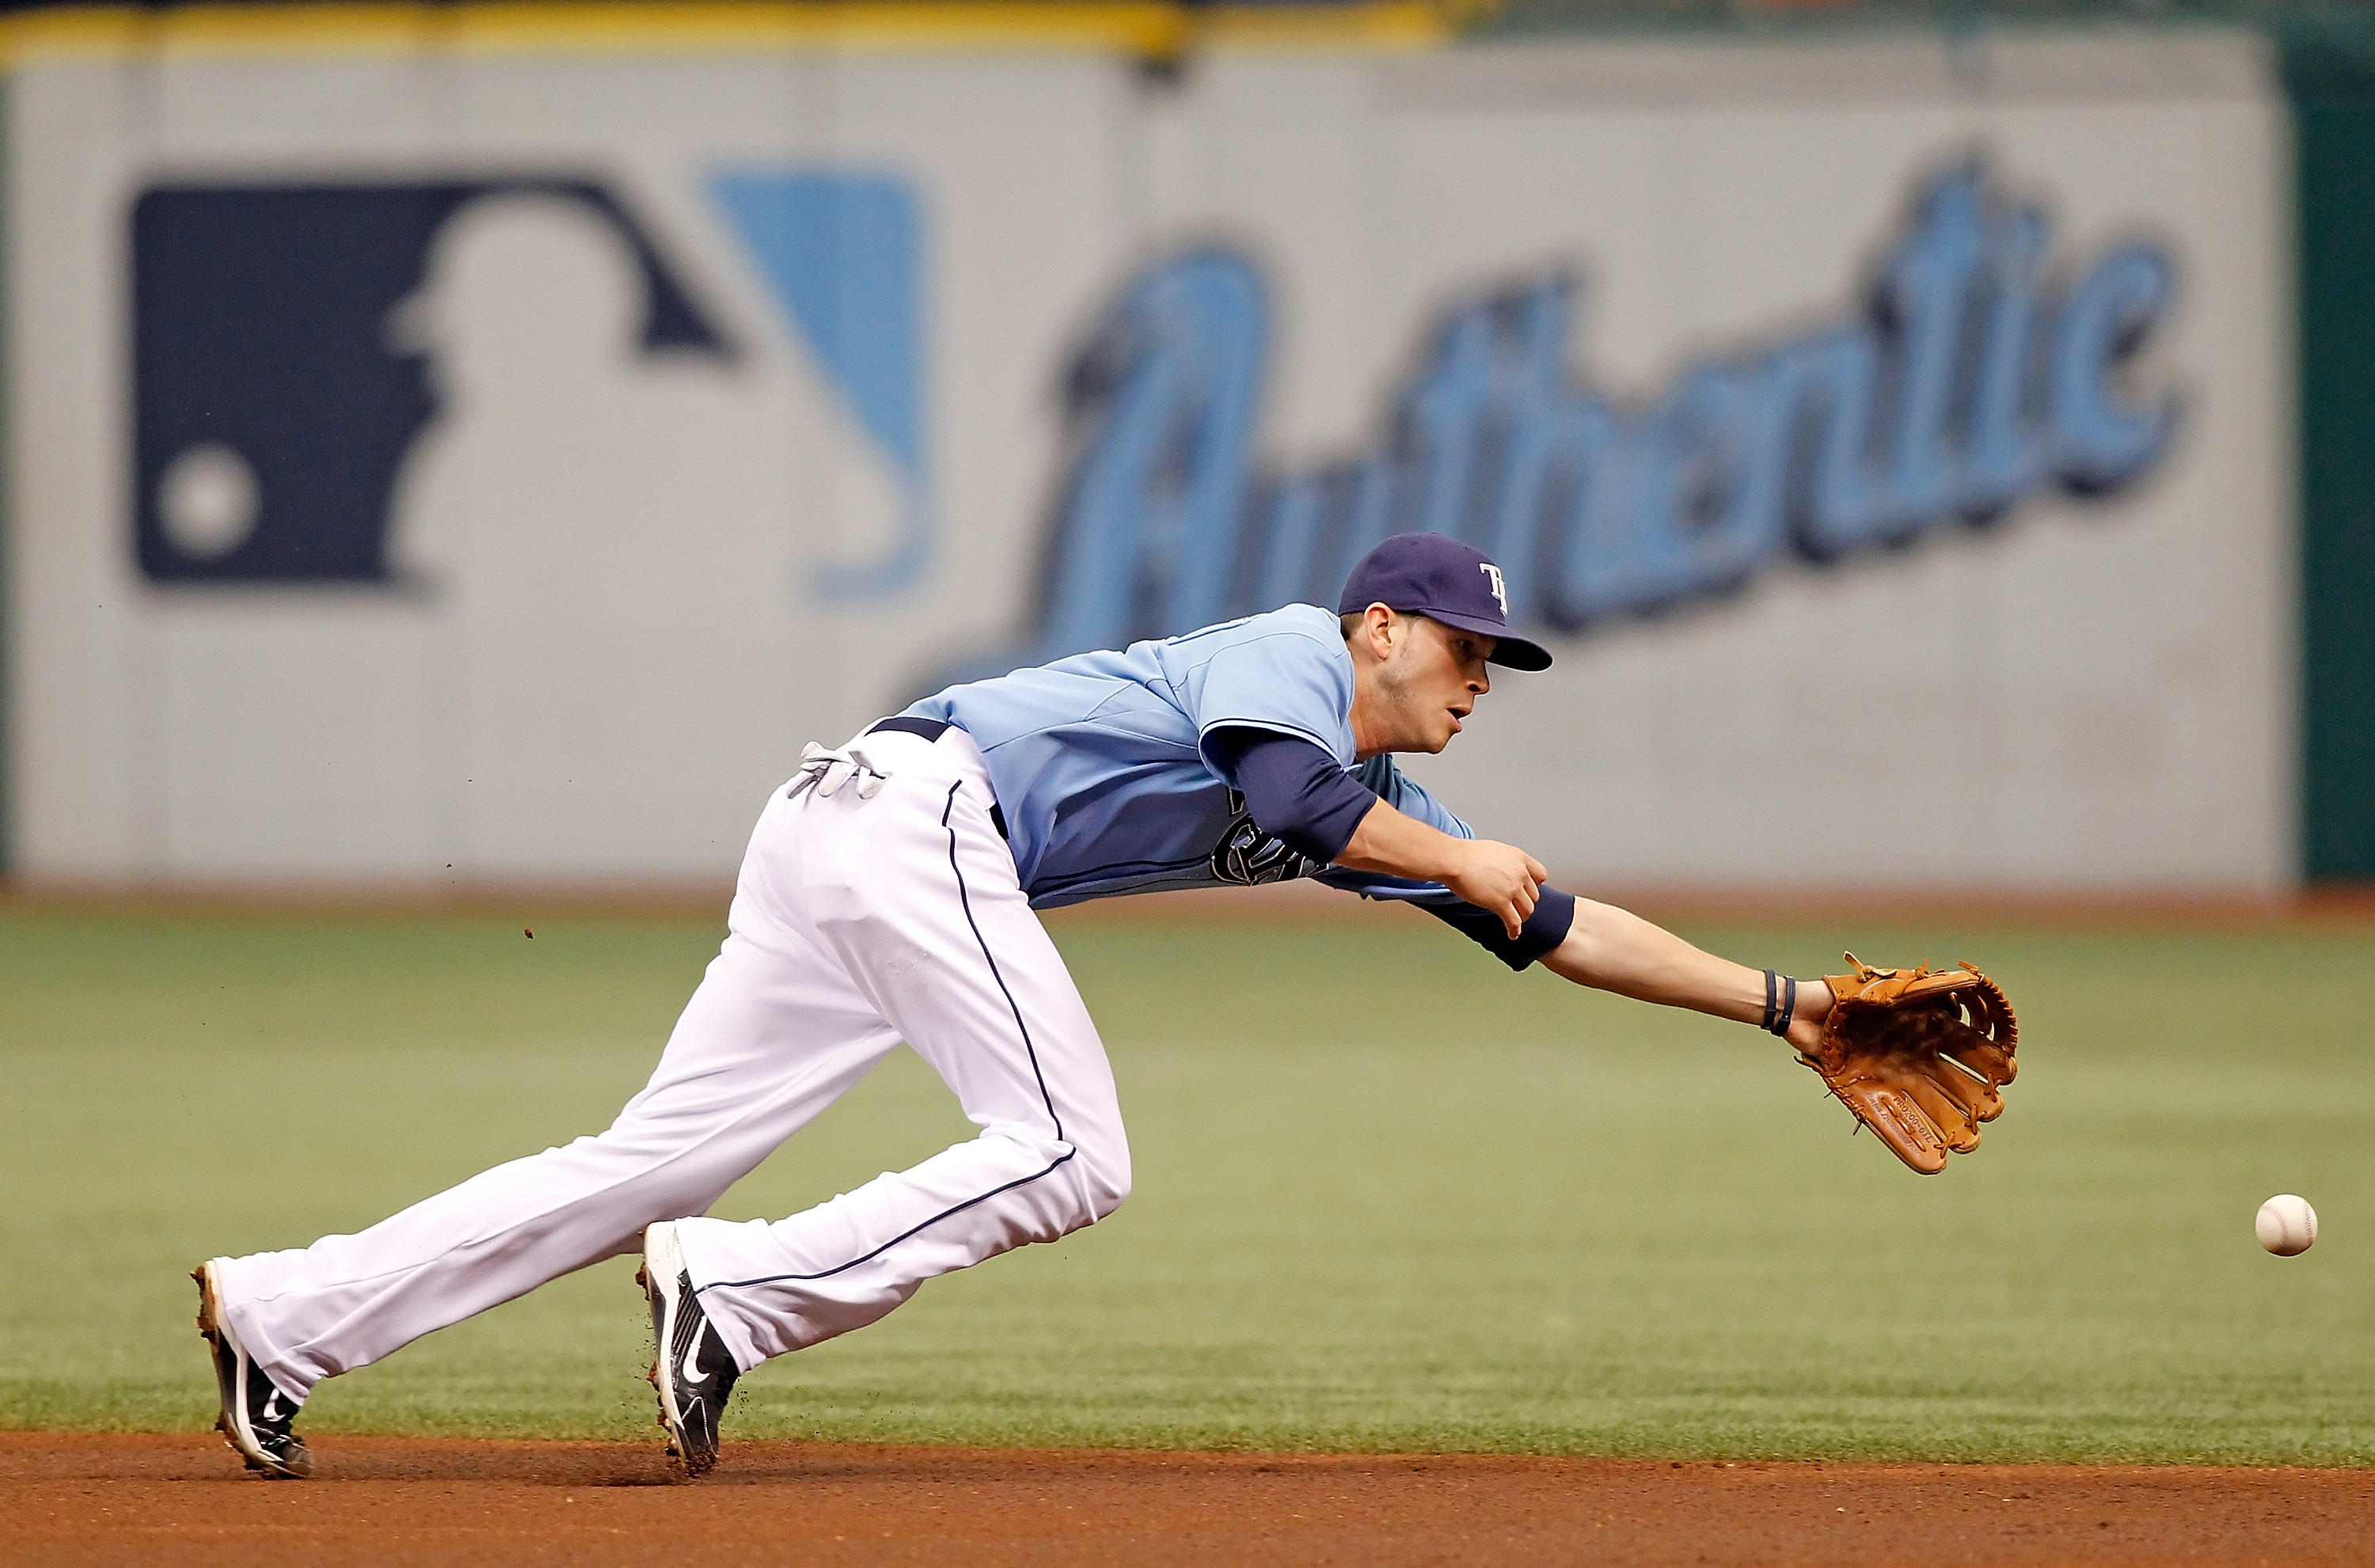 ST. PETERSBURG - AUGUST 01:  Infielder Reid Brignac #15 of the Tampa Bay Rays dives for a ball against the New York Yankees during the game at Tropicana Field on August 1, 2010 in St. Petersburg, Florida.  (Photo by J. Meric/Getty Images)